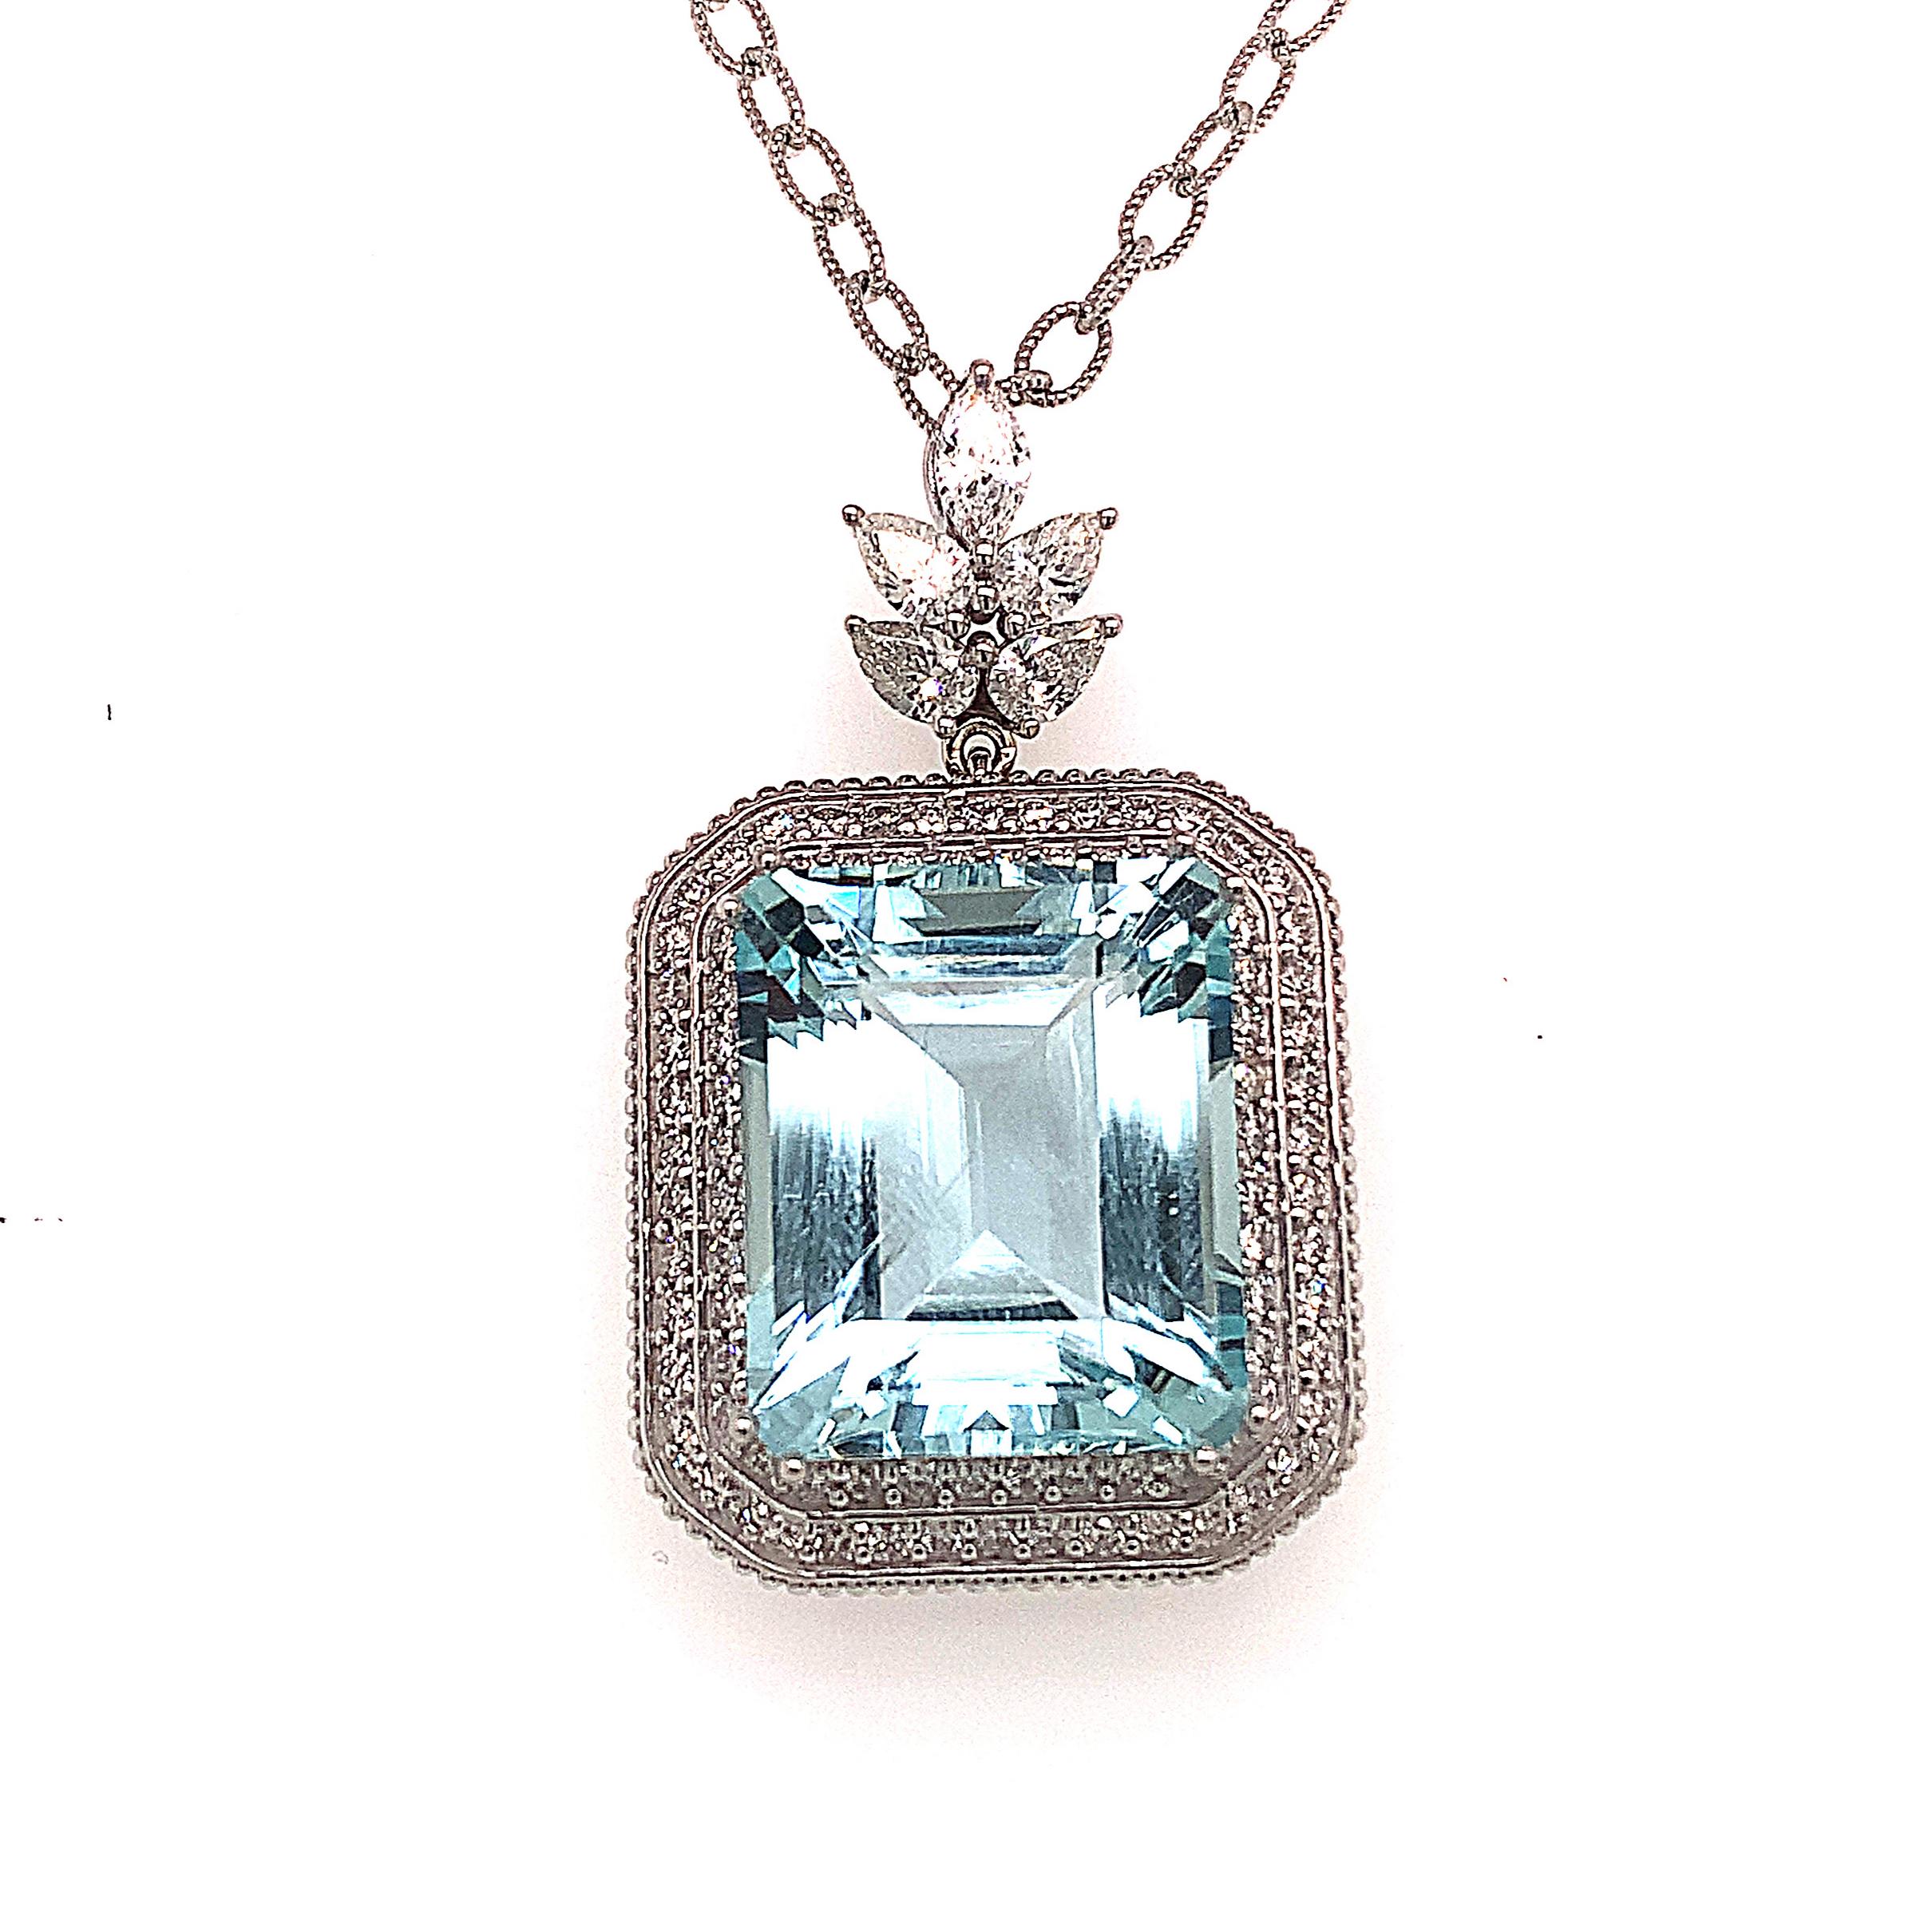 Natural Aquamarine Diamond Gold Necklace 27 TCW GIA Certified $16, 475 121172 For Sale 1